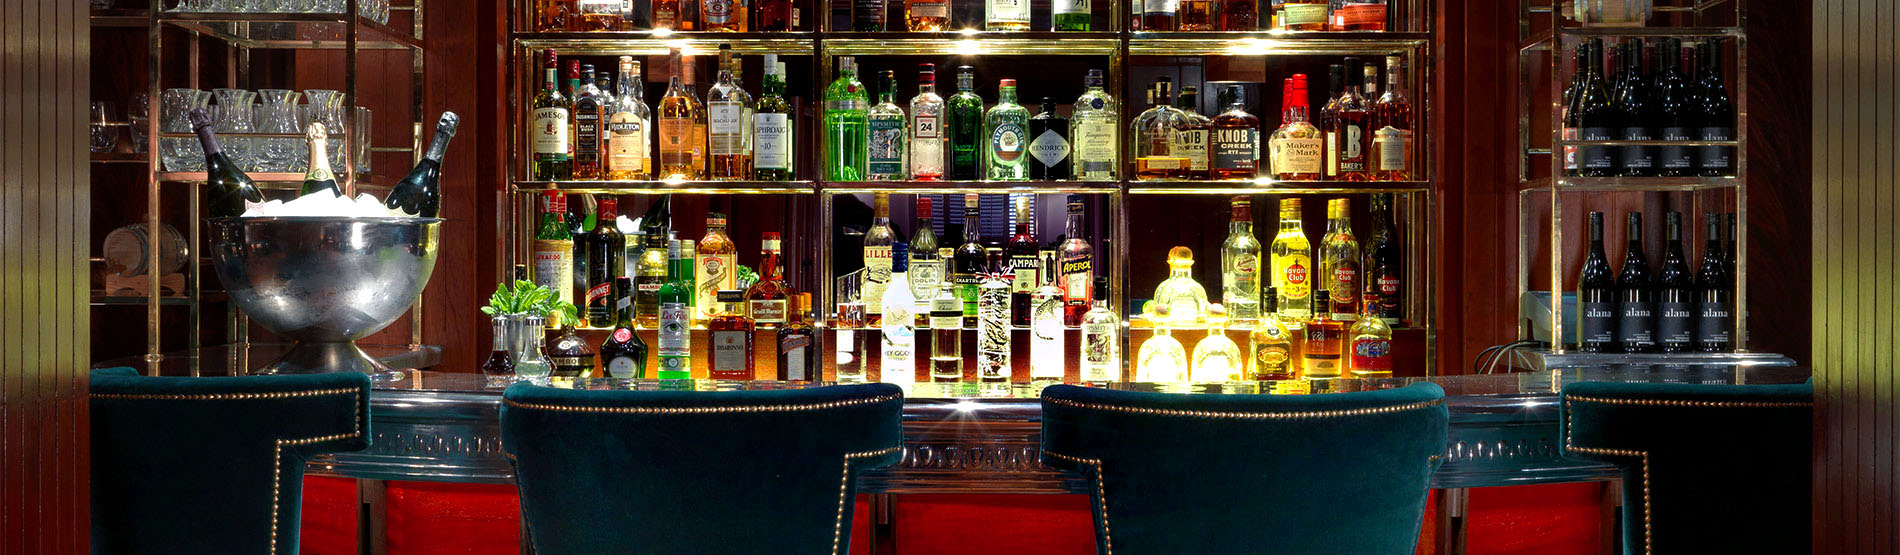 The bar at the Bloomsbury Club with green chairs and image of the bar with drinks